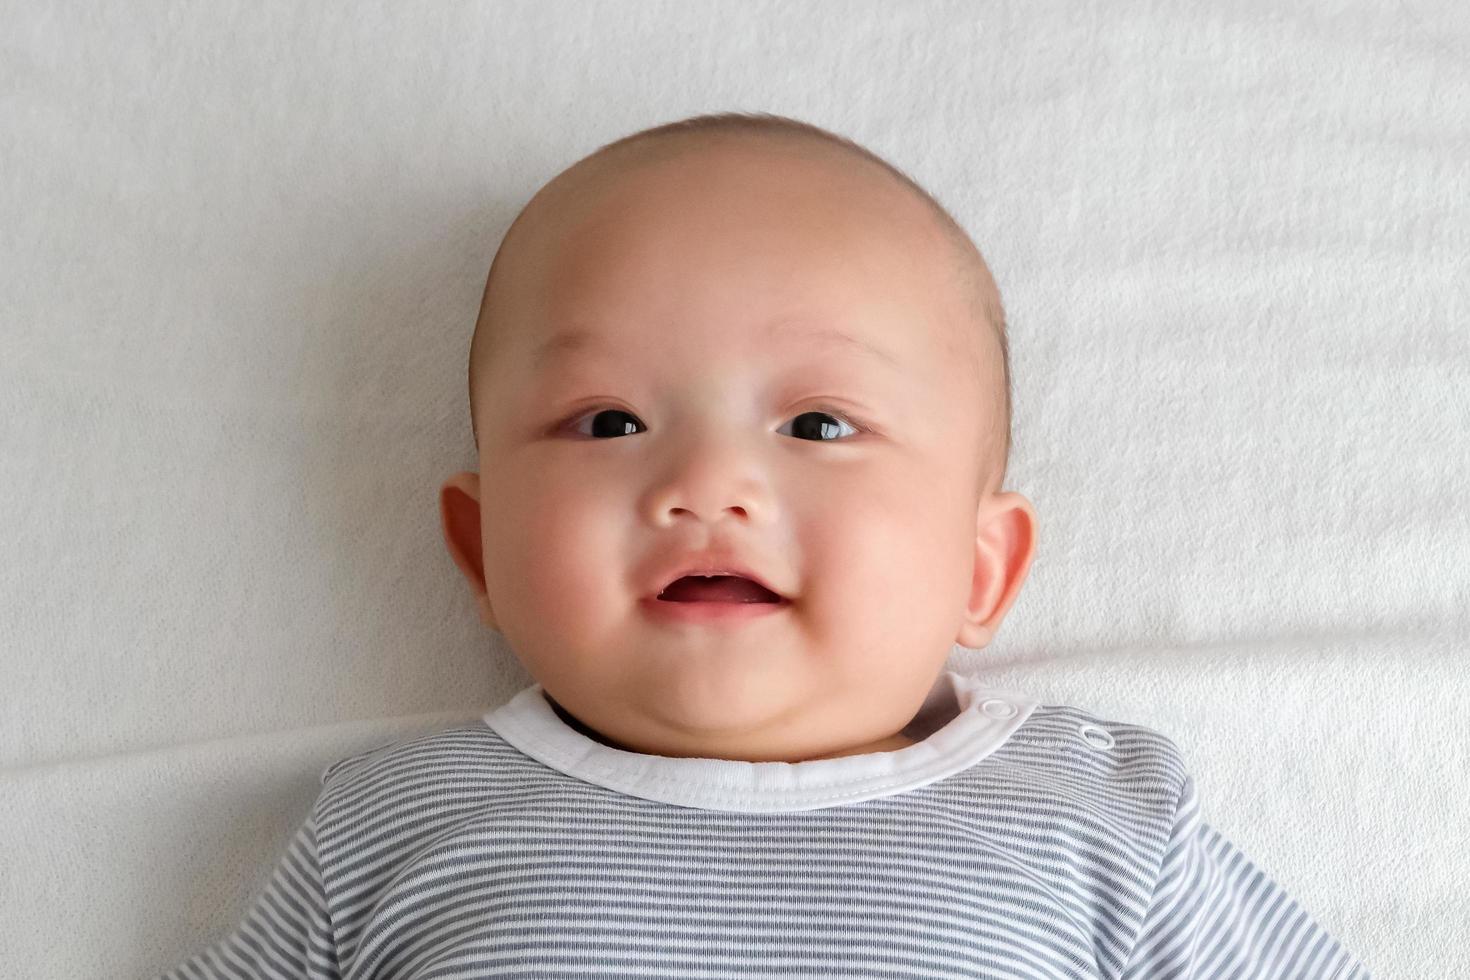 A baby in a striped shirt lies smiling on the white carpet. photo